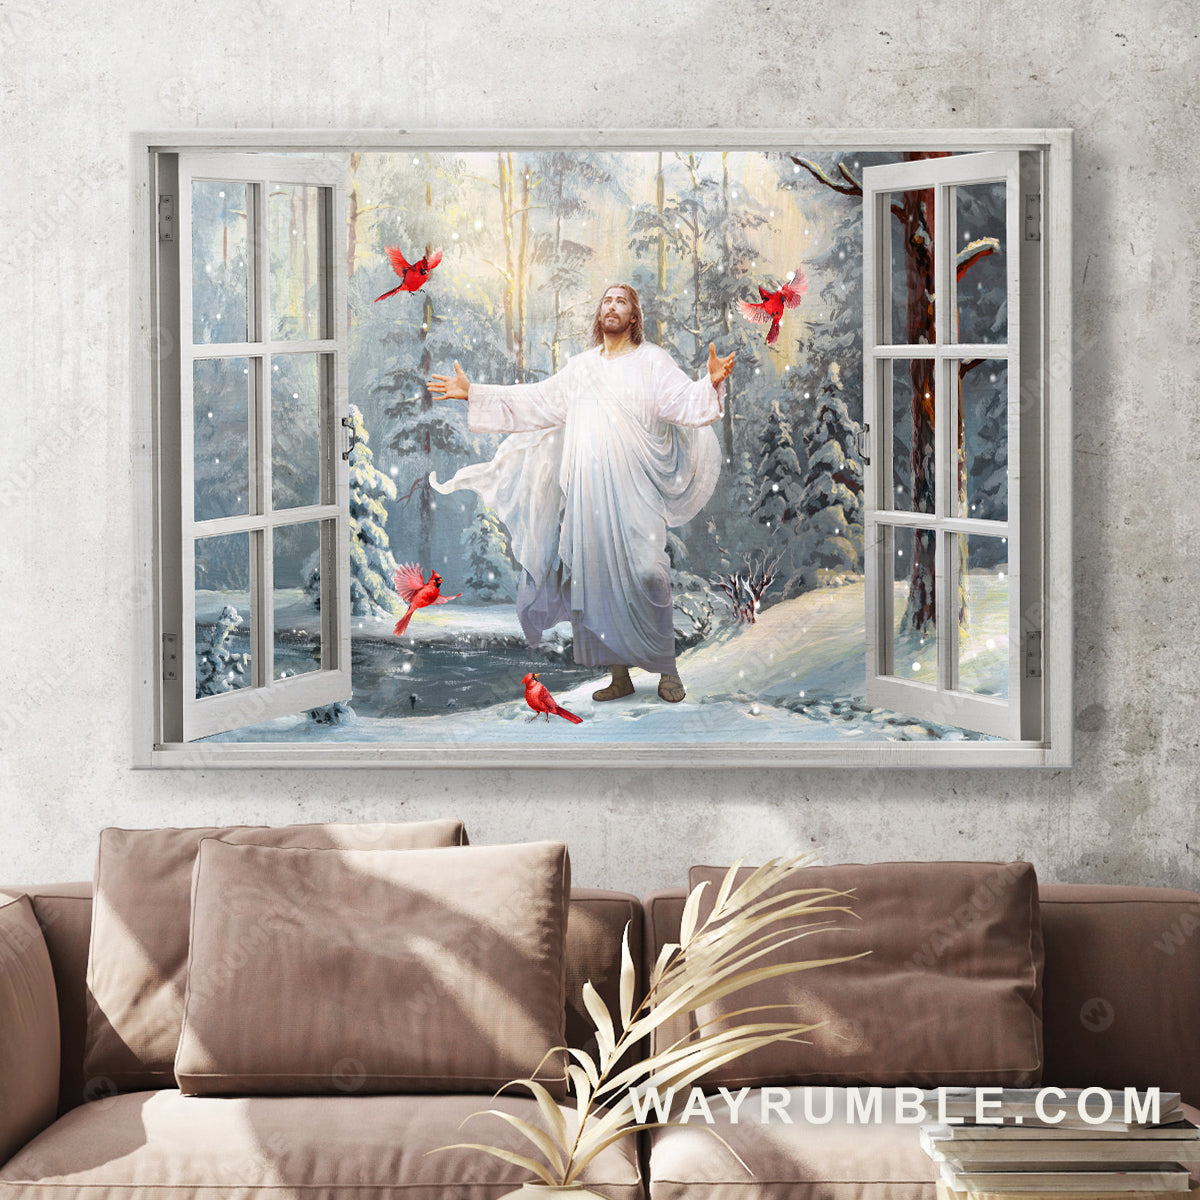 Winter Scene Painting On A Window Frame